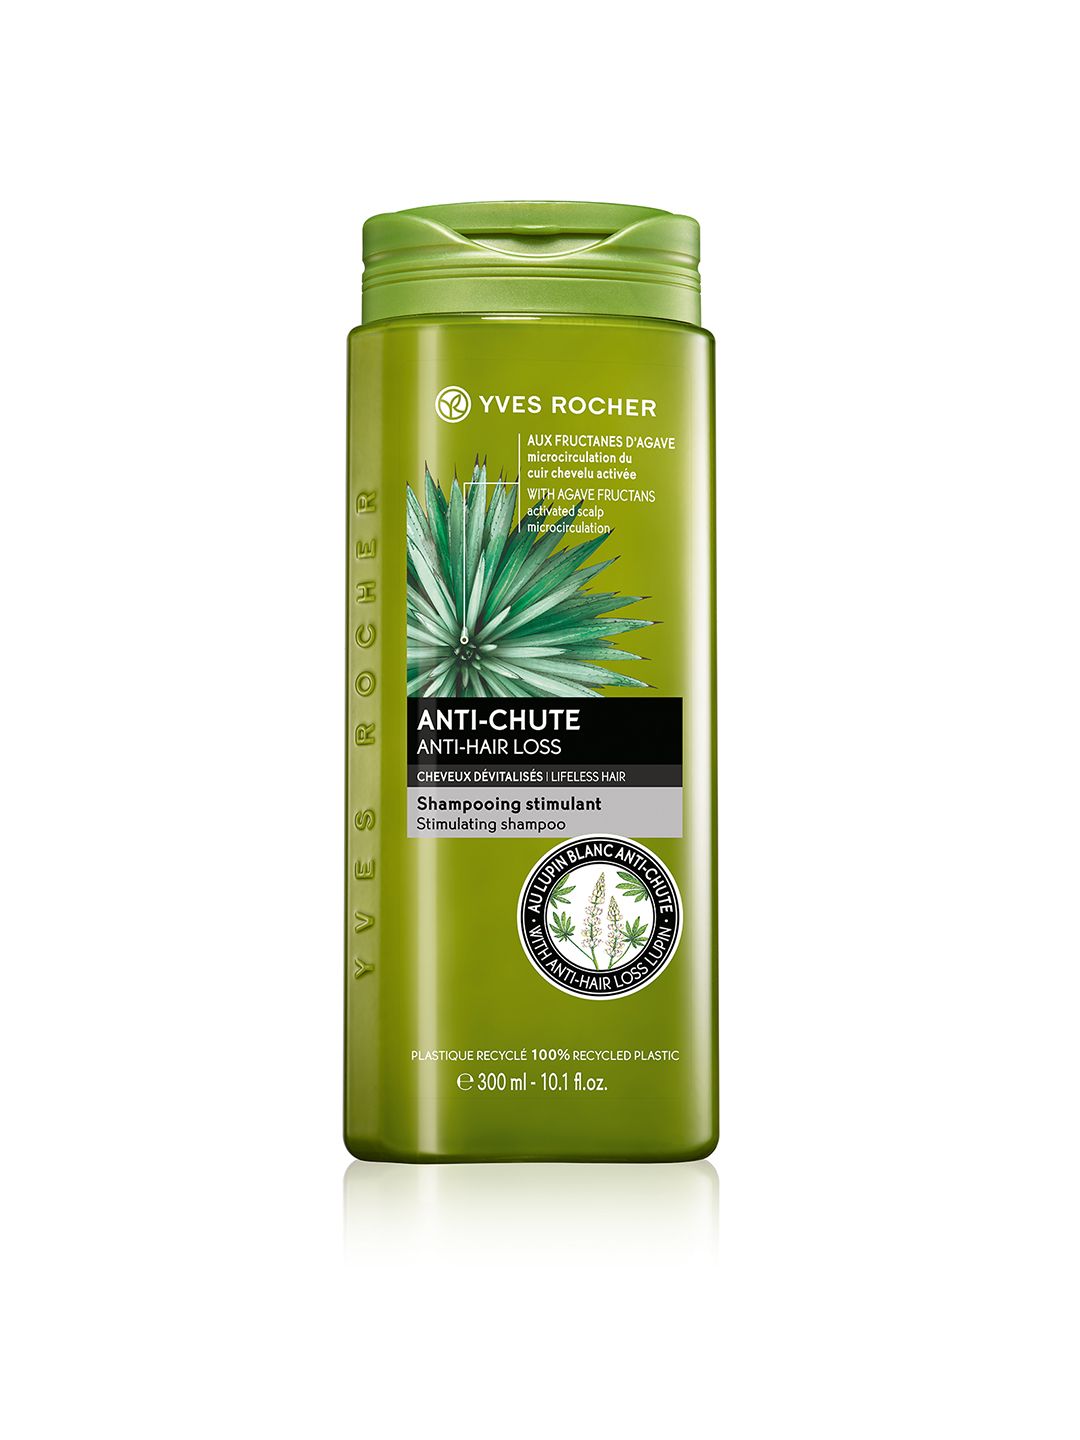 Yves Rocher Unisex Anti-Hair Loss Supplement Stimulating Shampoo 300 ml Price in India